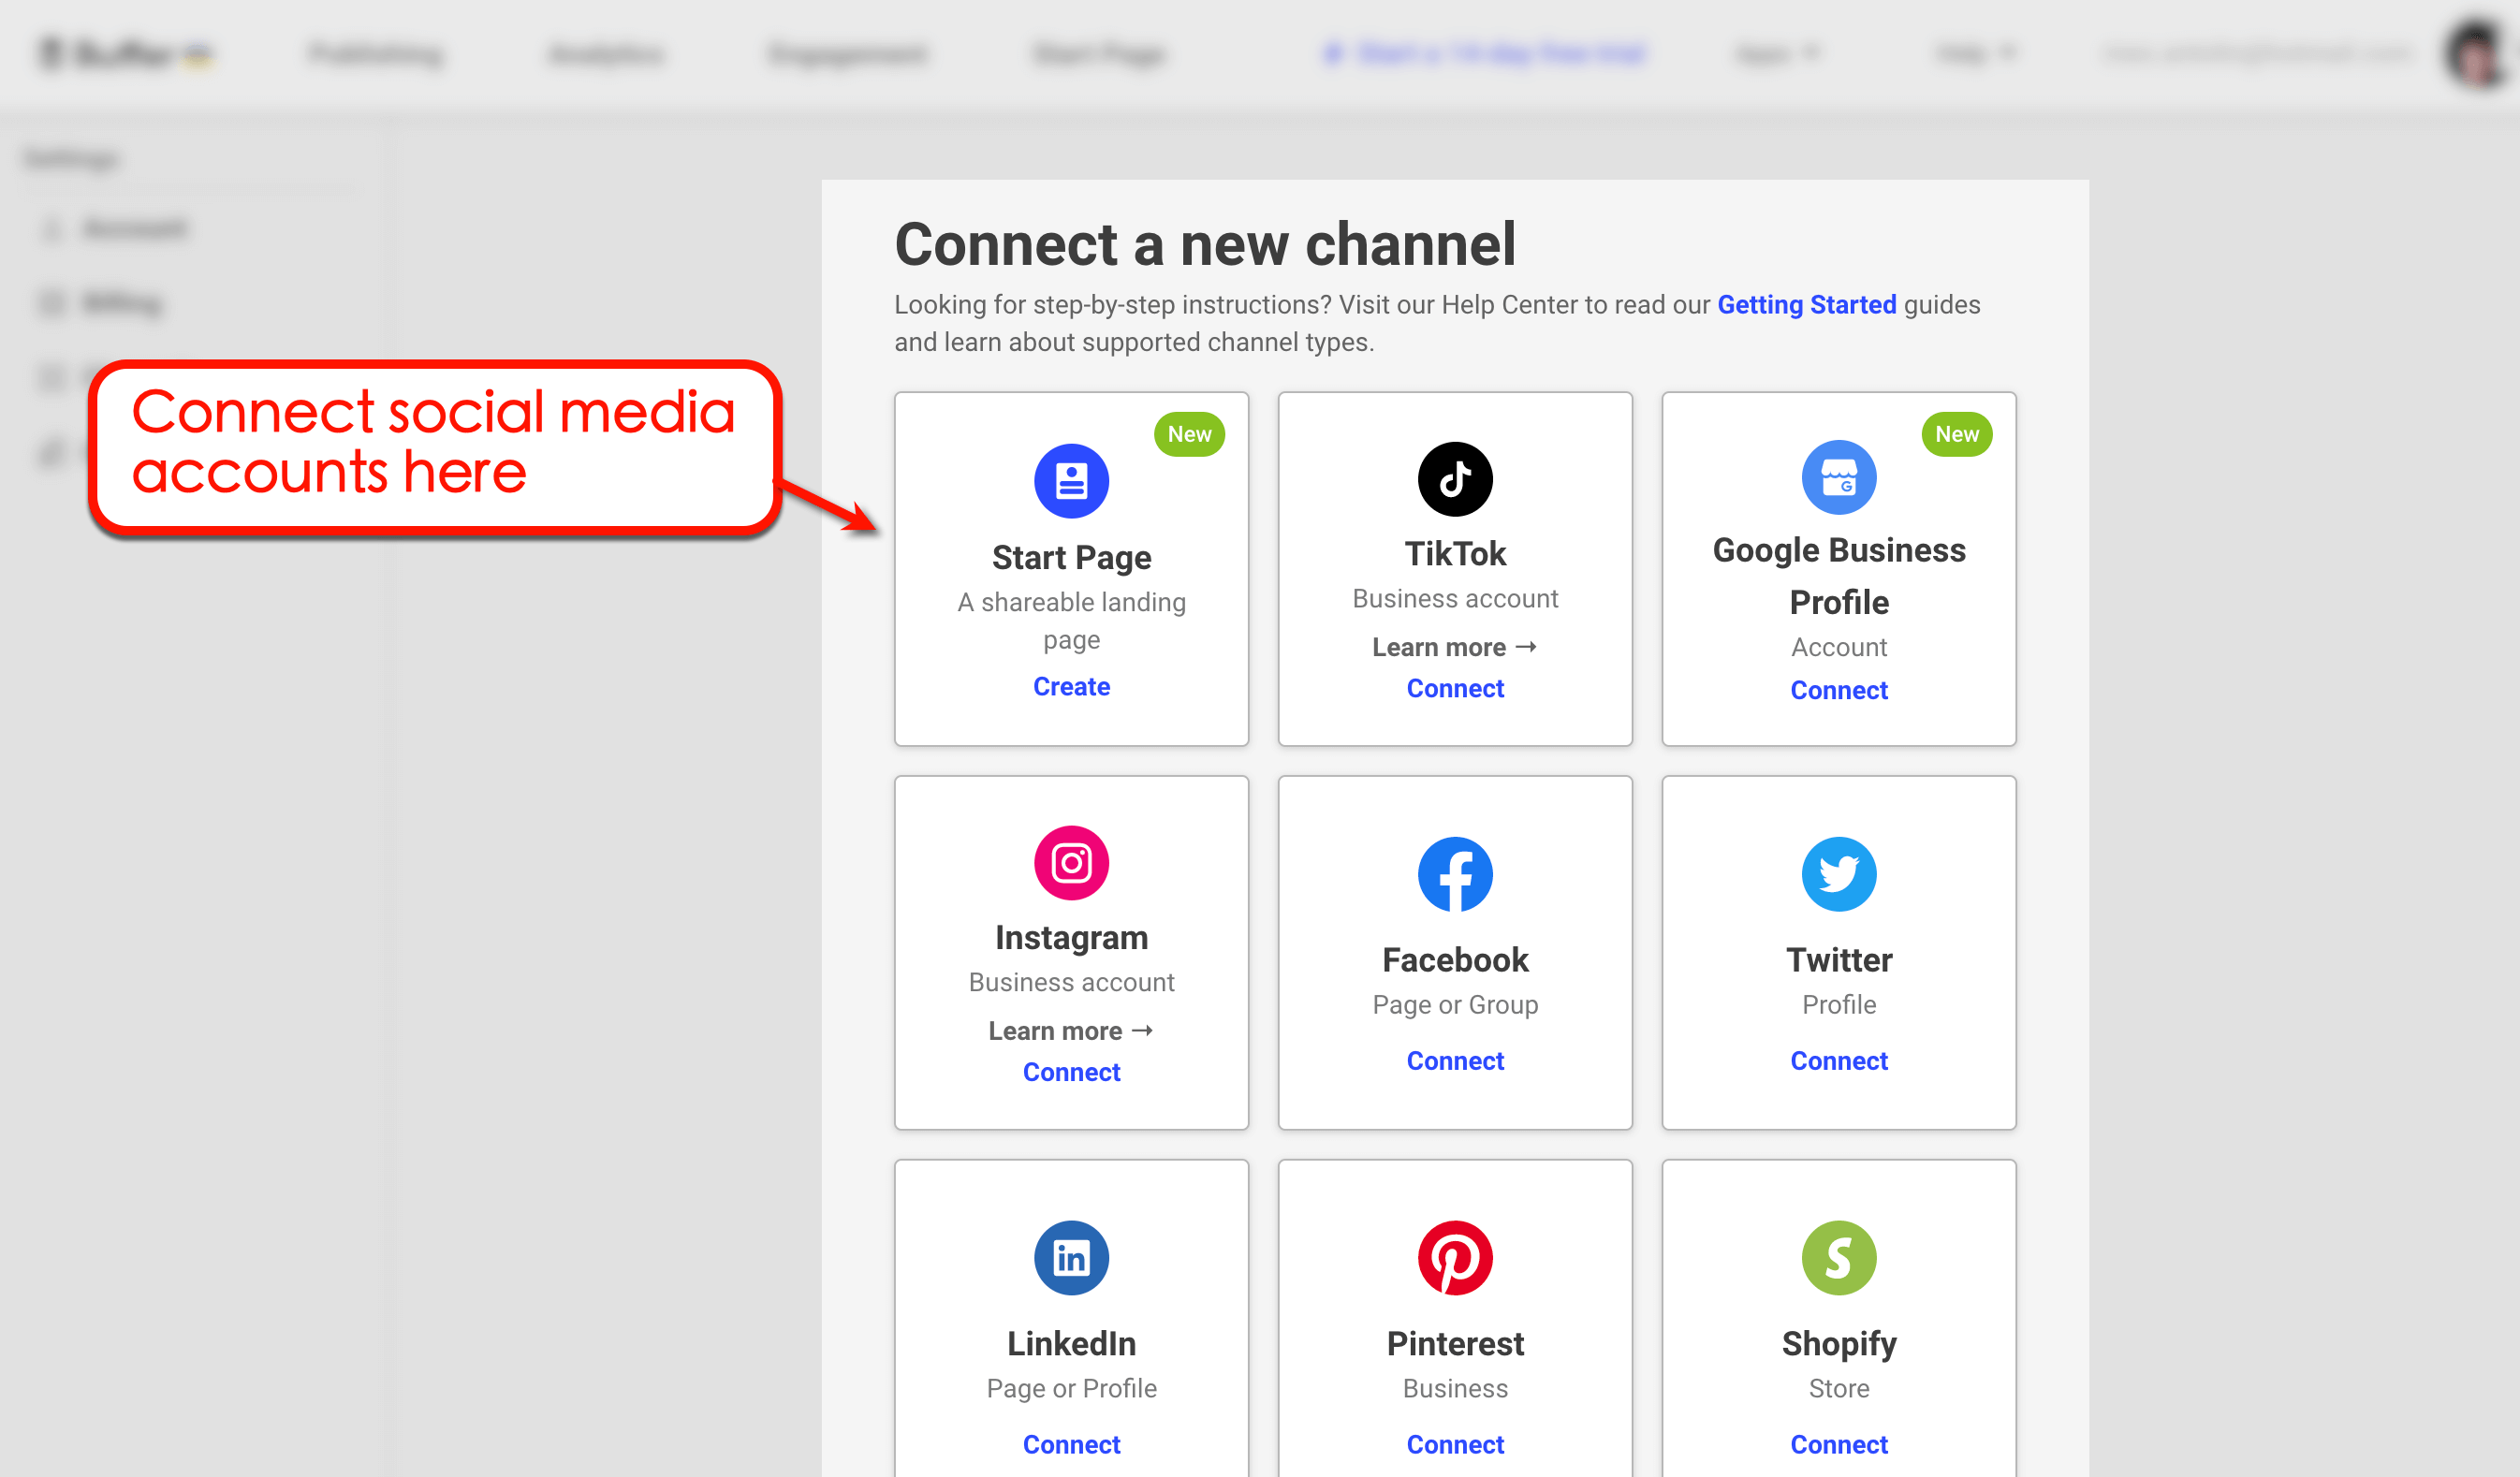 Buffer's option to connect to social media accounts